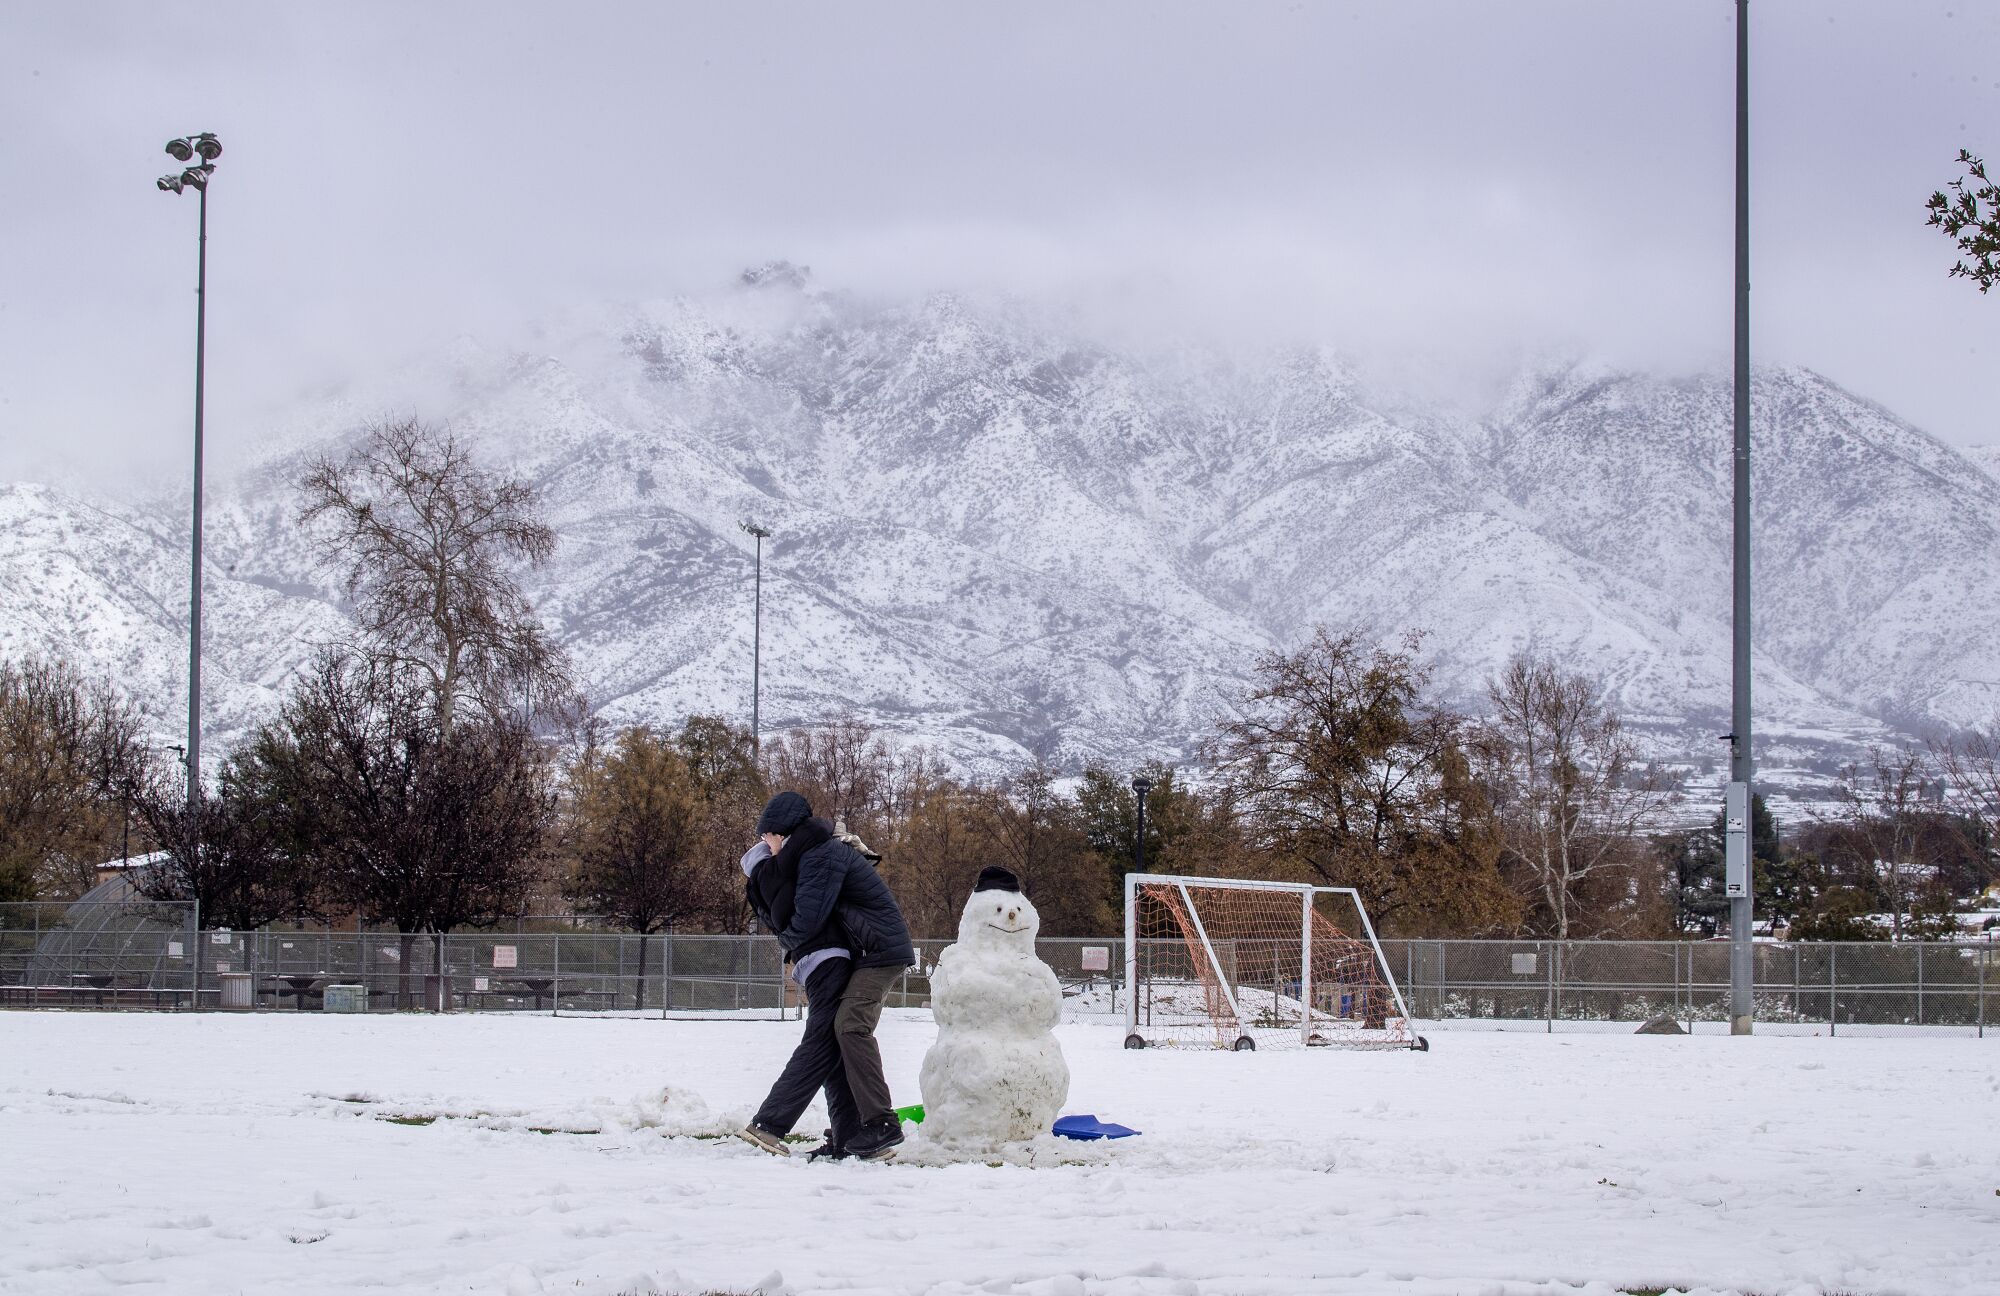  a snowman amidst the rare sight of falling snow in Southern California at Yucaipa Community Park in Yucaipa